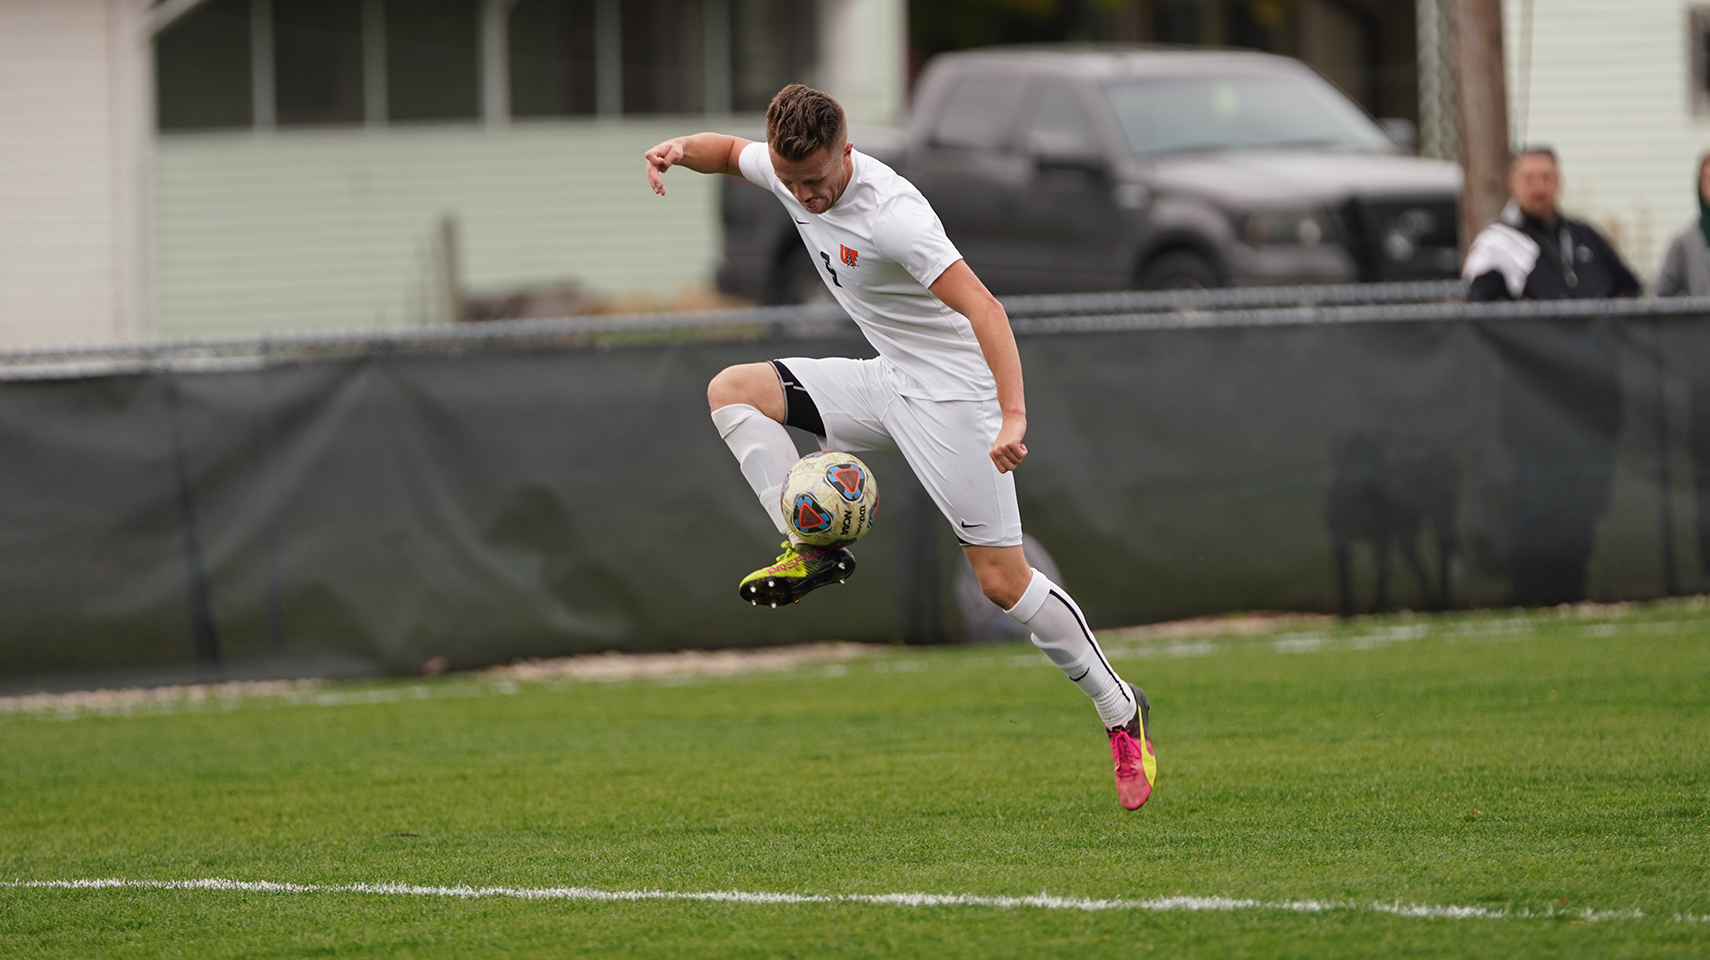 Men's soccer player in white trapping the ball